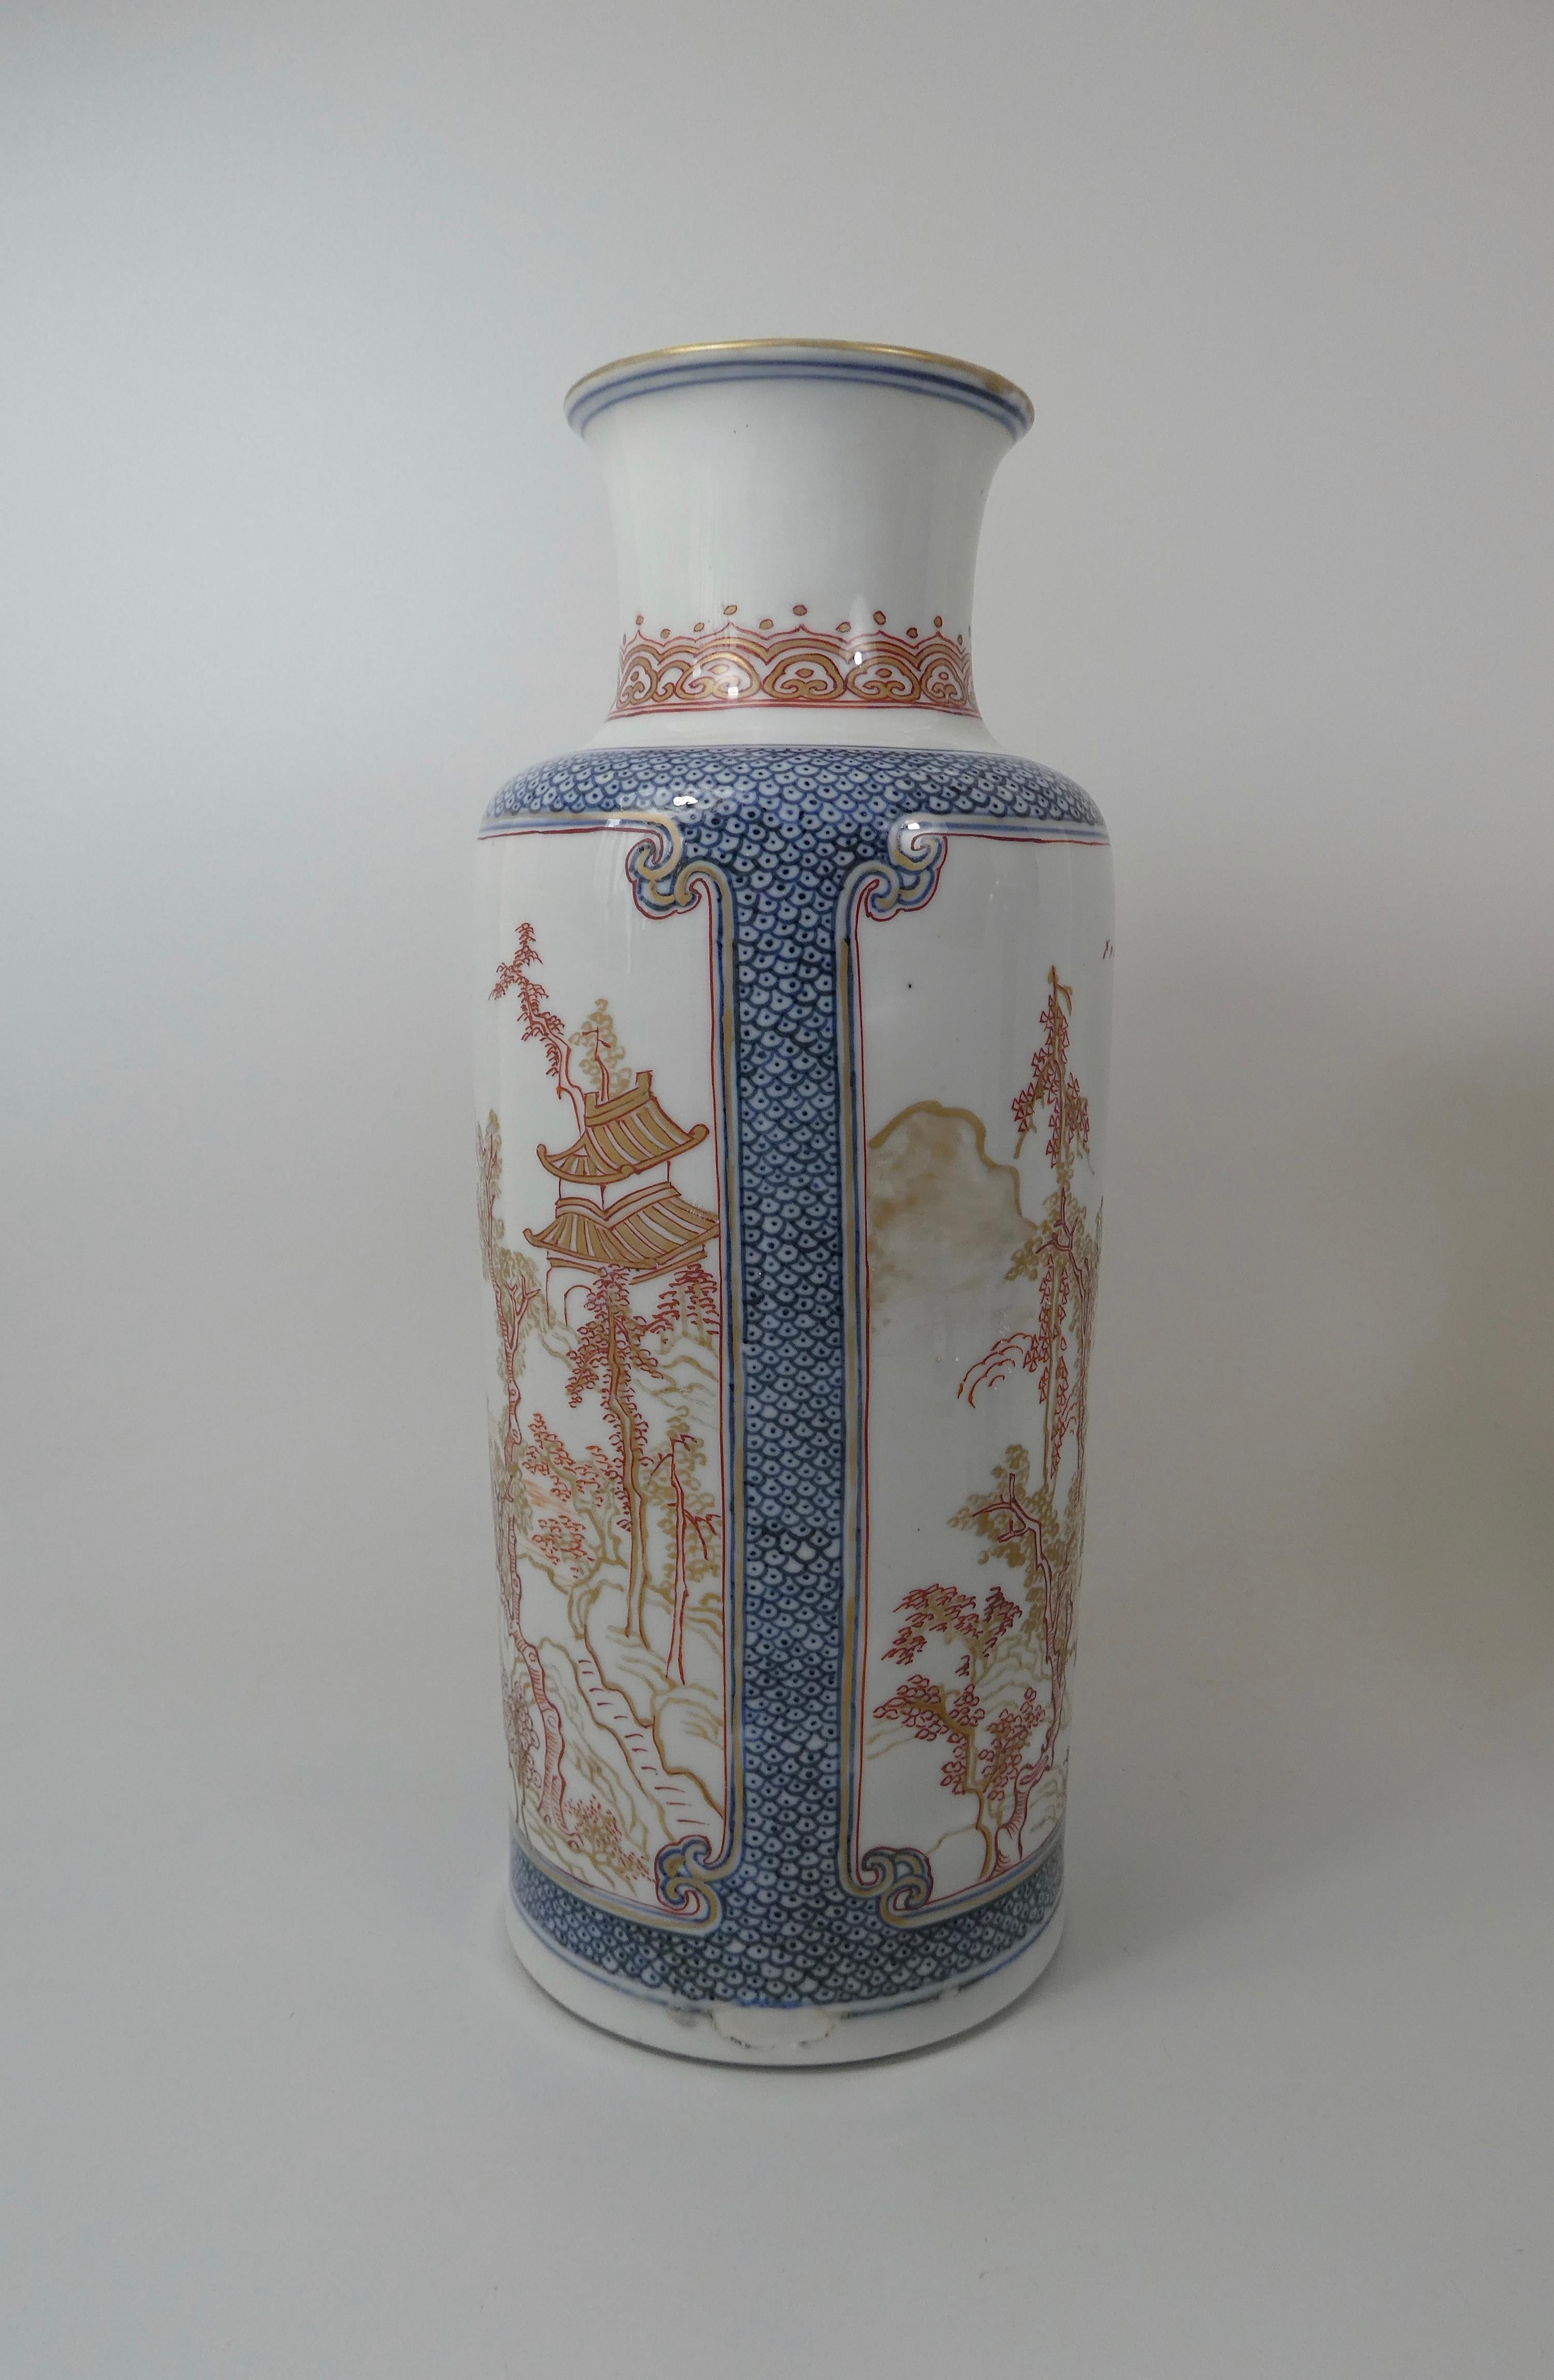 Early 18th Century Pair of Chinese Porcelain ‘Rouge de Fer’ Decorated Vases, c. 1700. Kangxi.